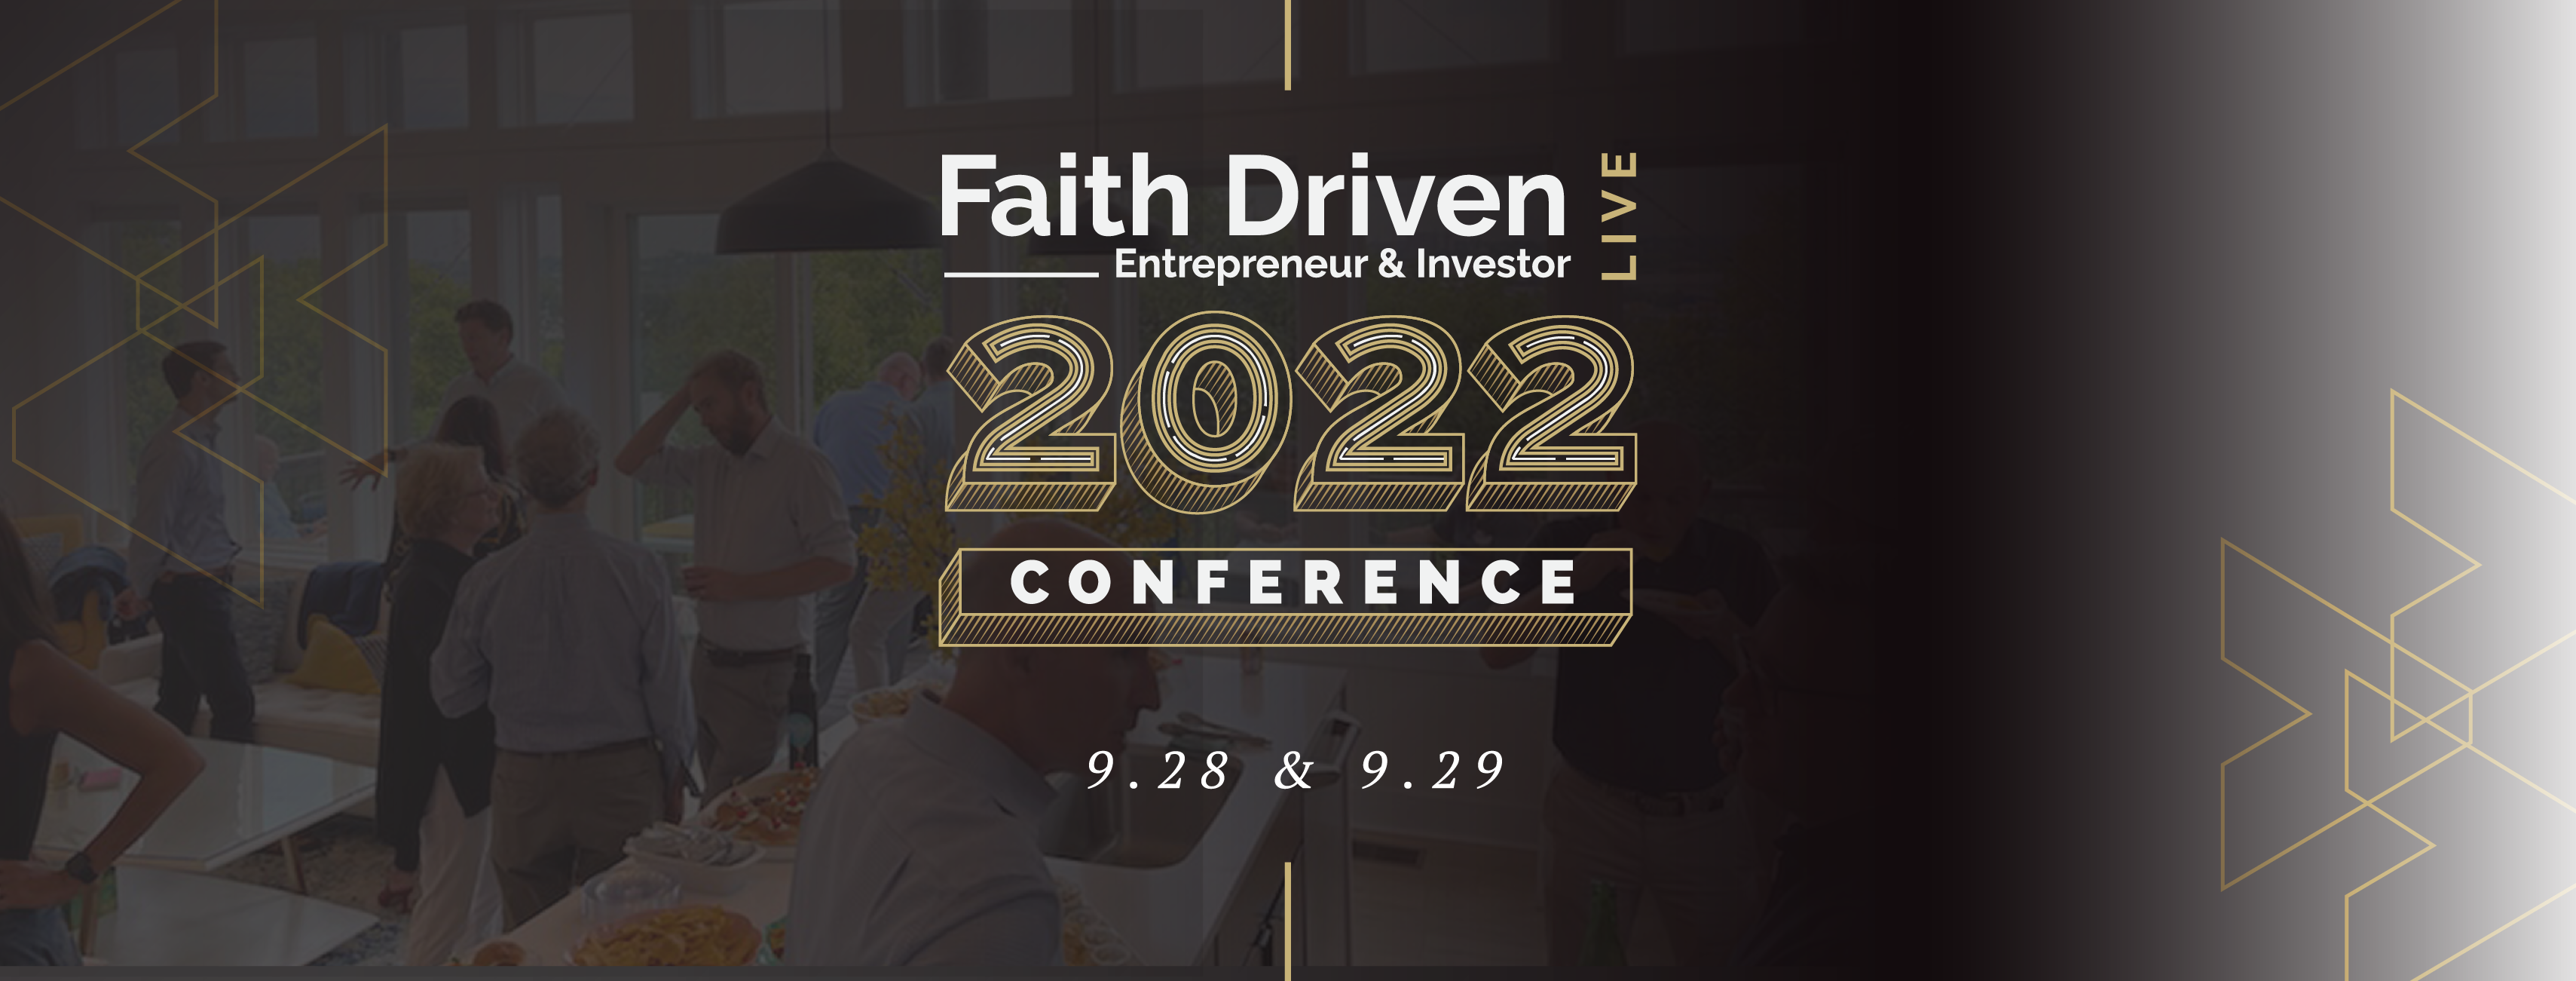 2022_Conference_graphics_facebook